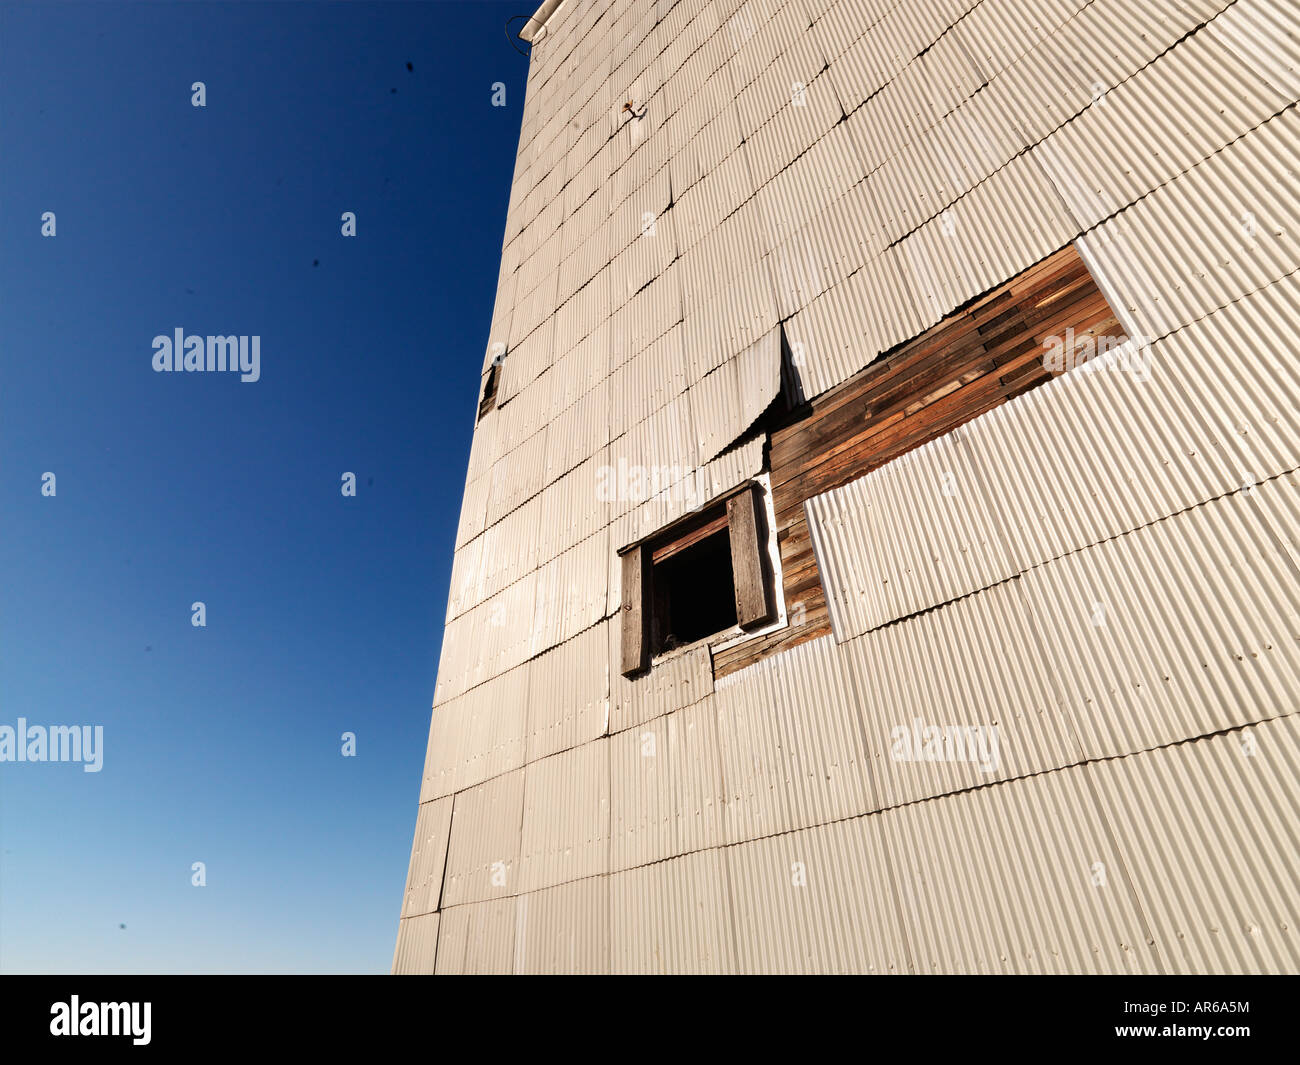 Exterior of agricultural building Stock Photo